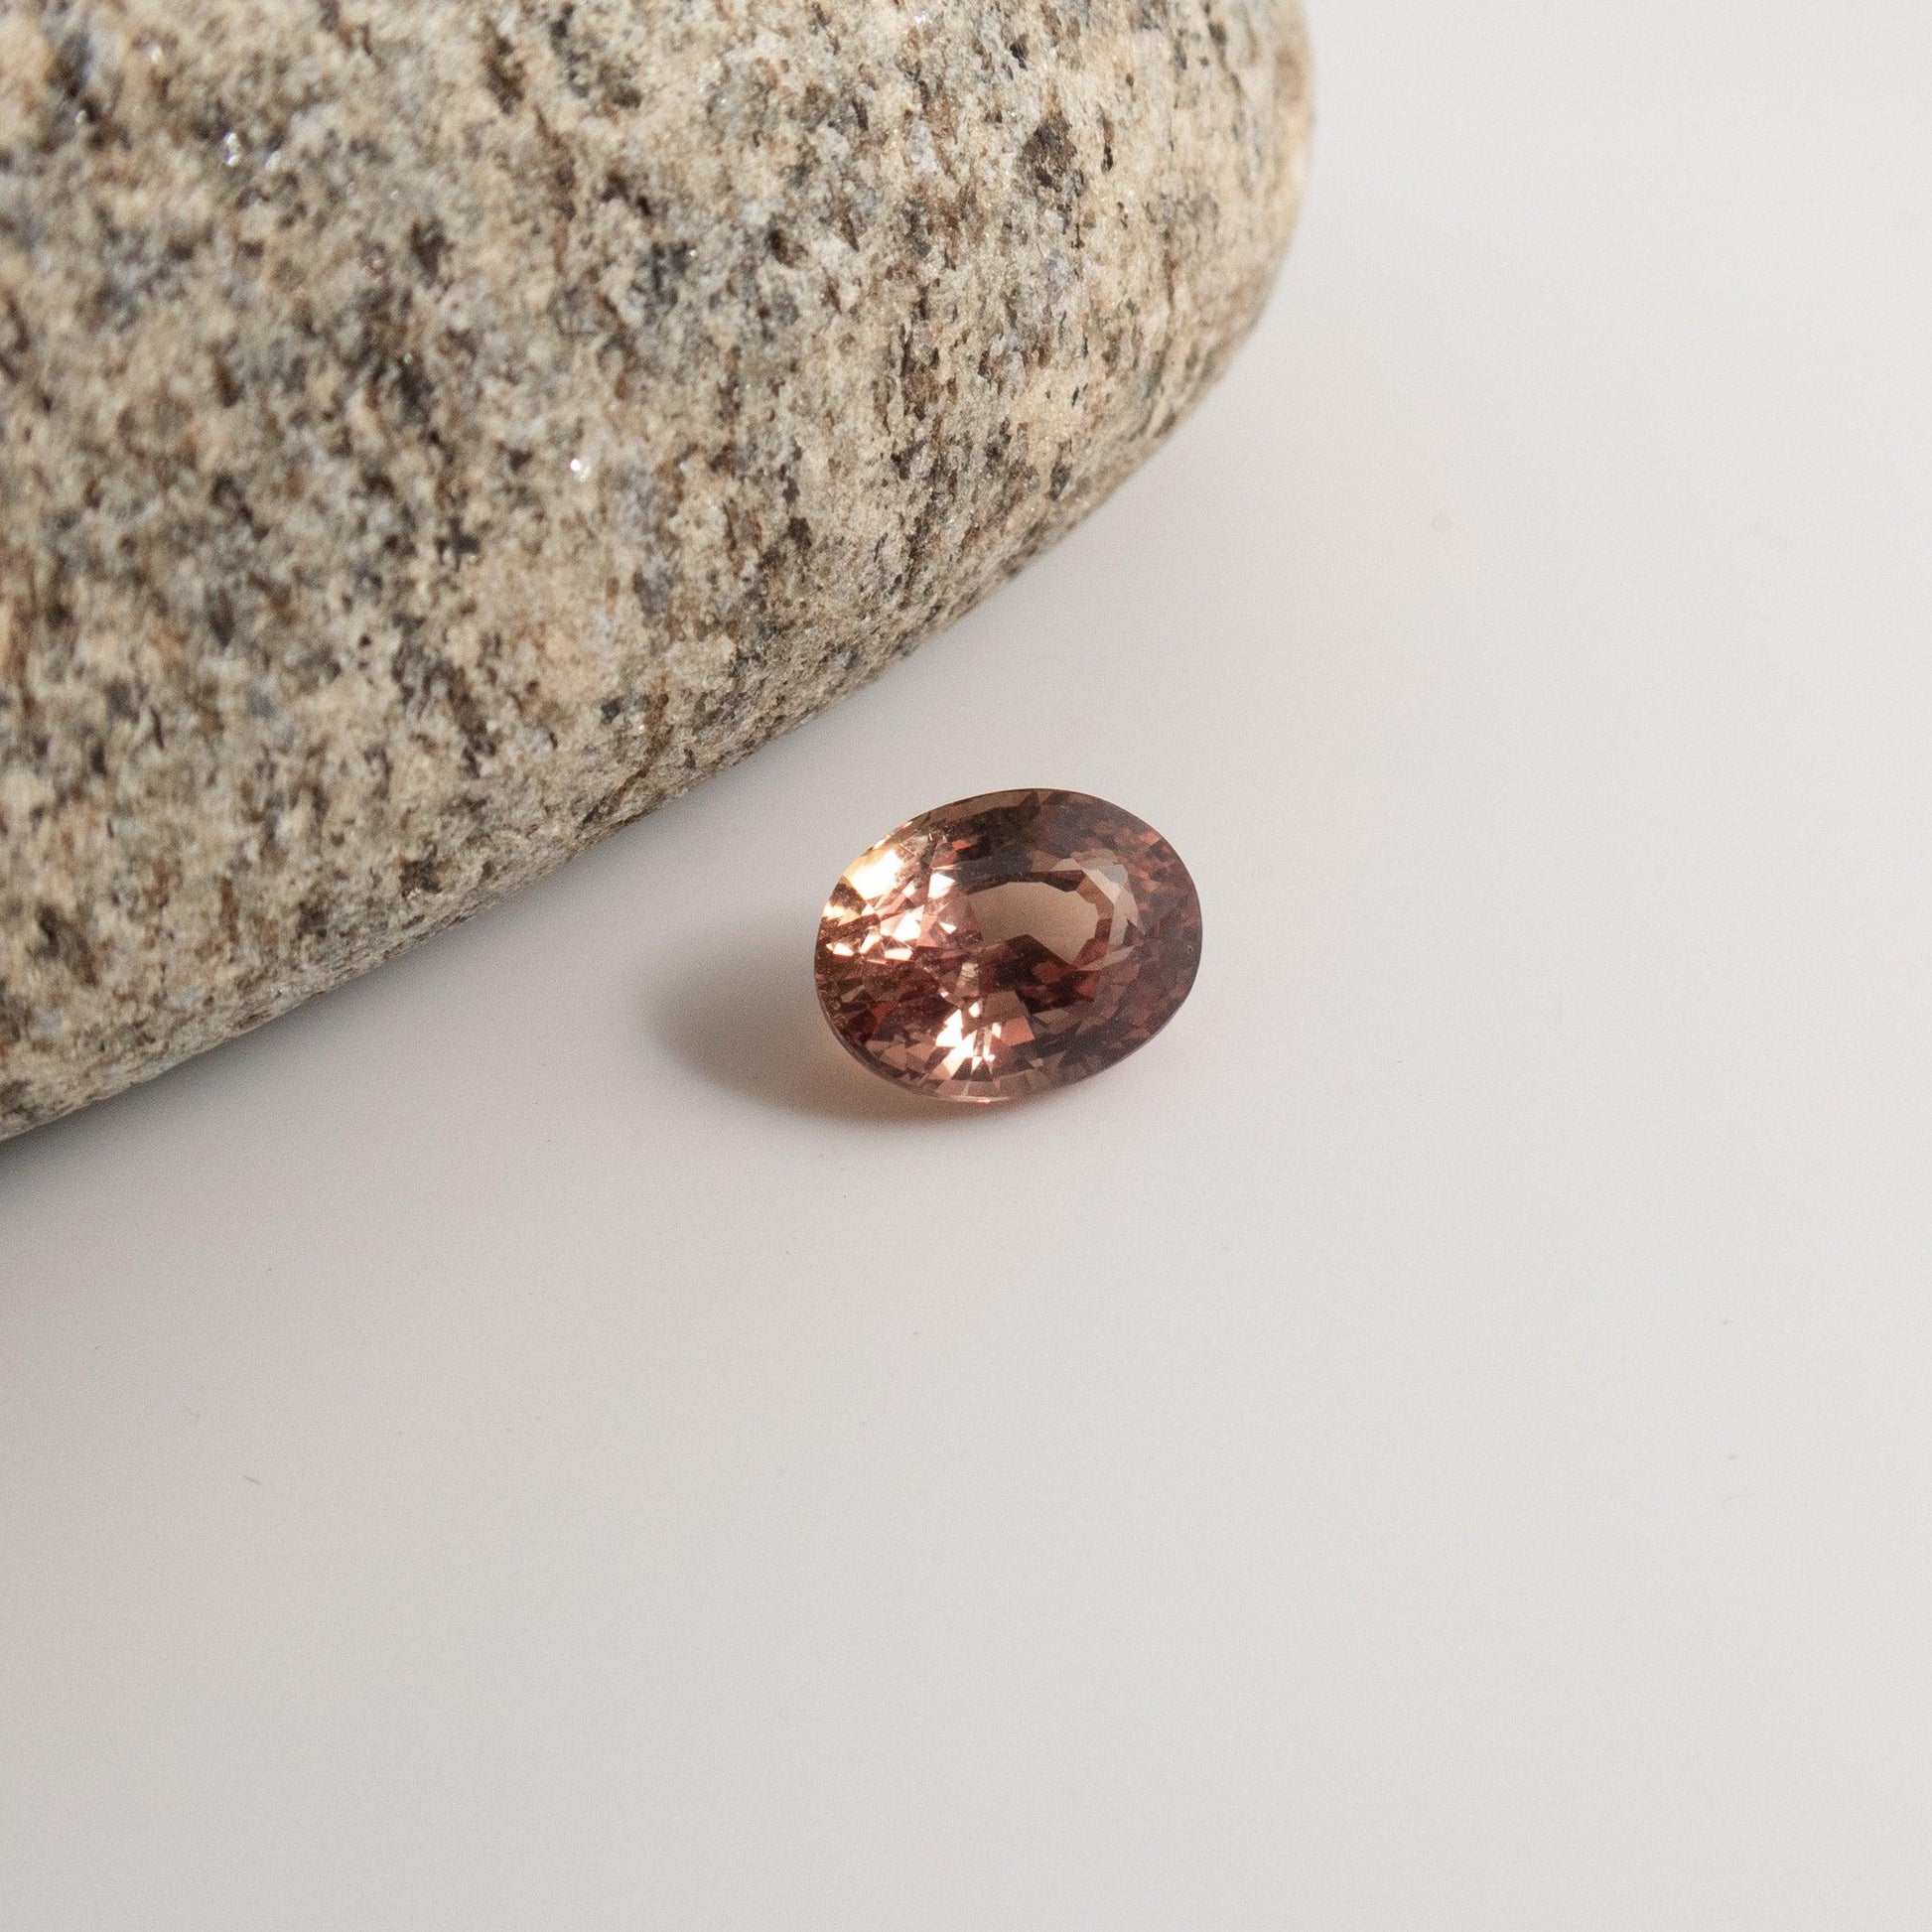 Orange-ish Brown Sapphire Natural Heated 2.67ct - The Colored Stone Co.